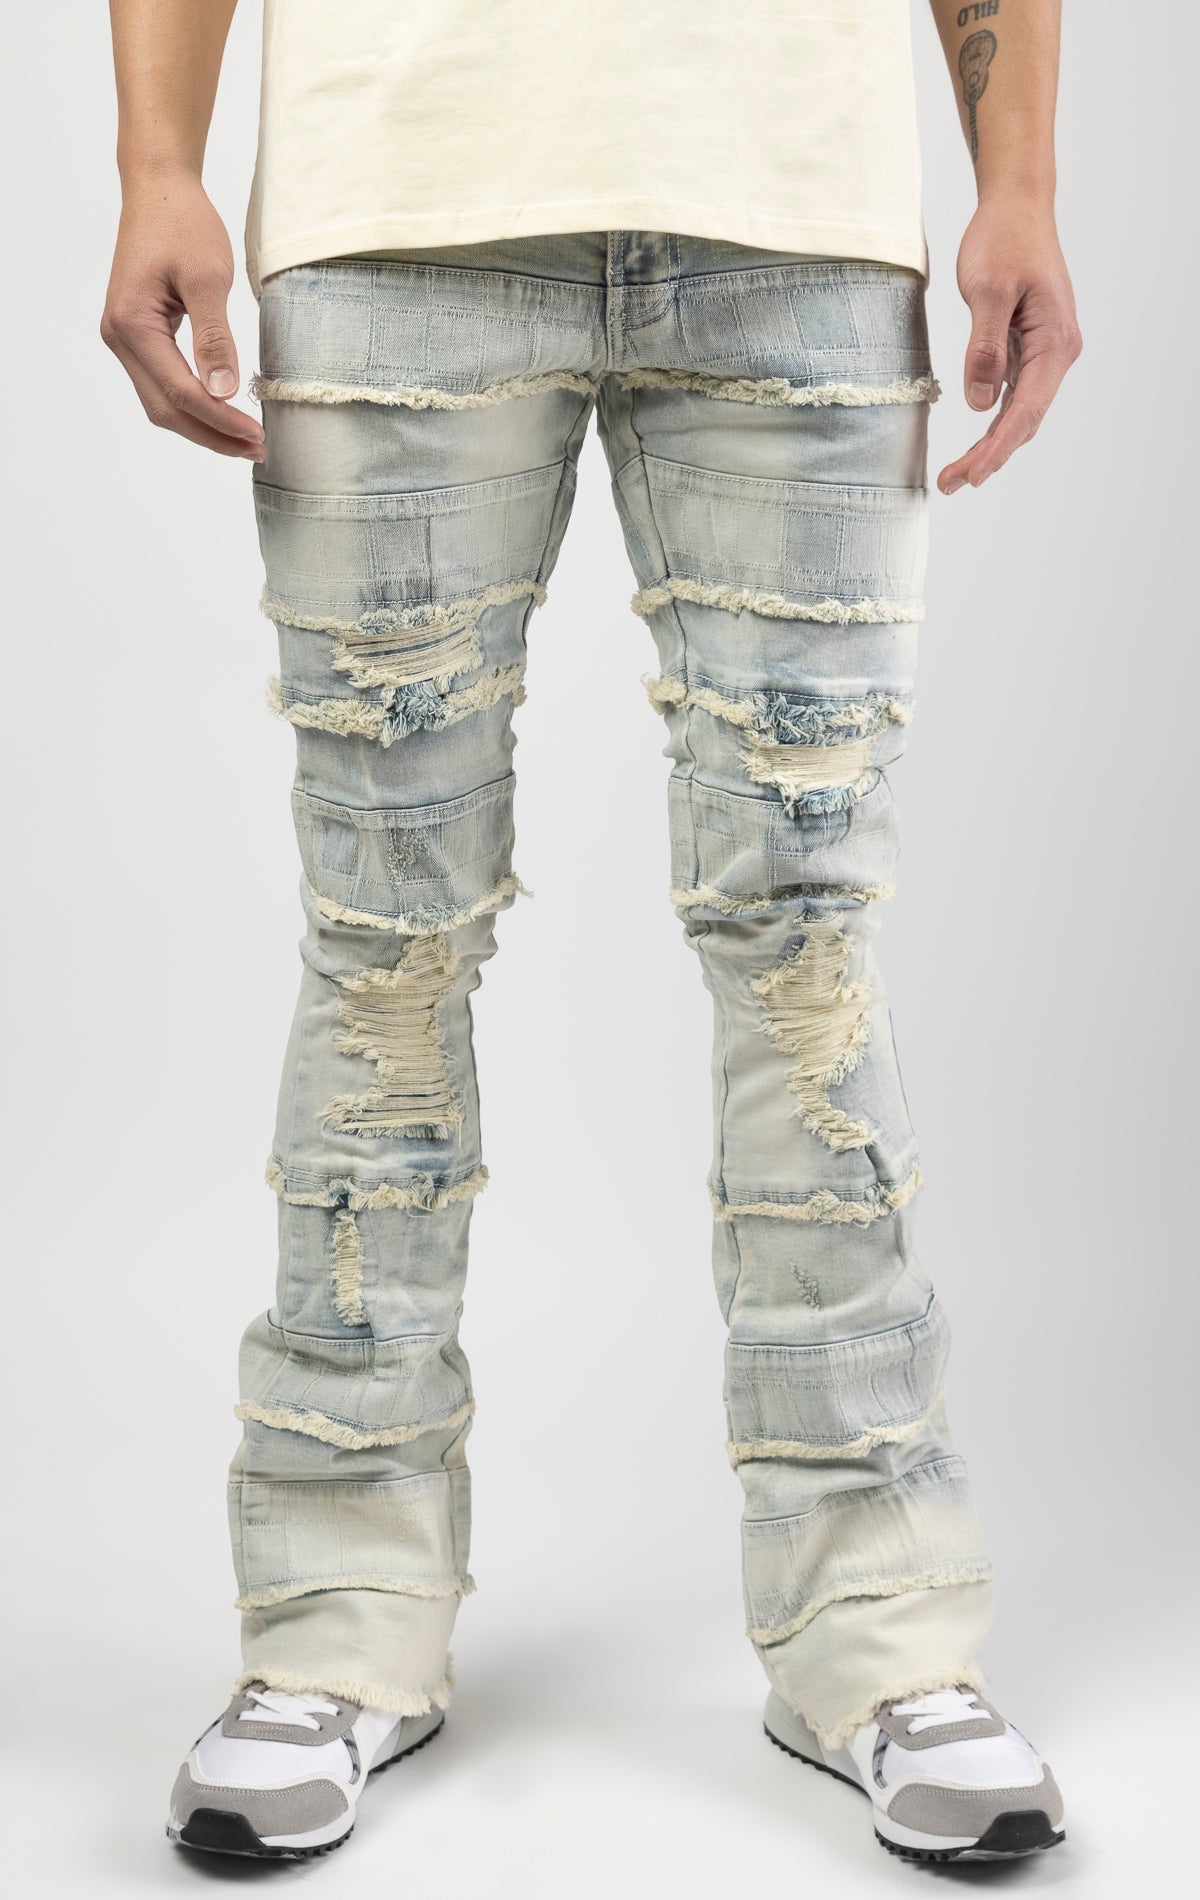 Light wash iconic stacked jeans crafted from high-quality, durable denim fabric consisting of 98% cotton and 2% spandex with a semi flare silhouette and a length of 35